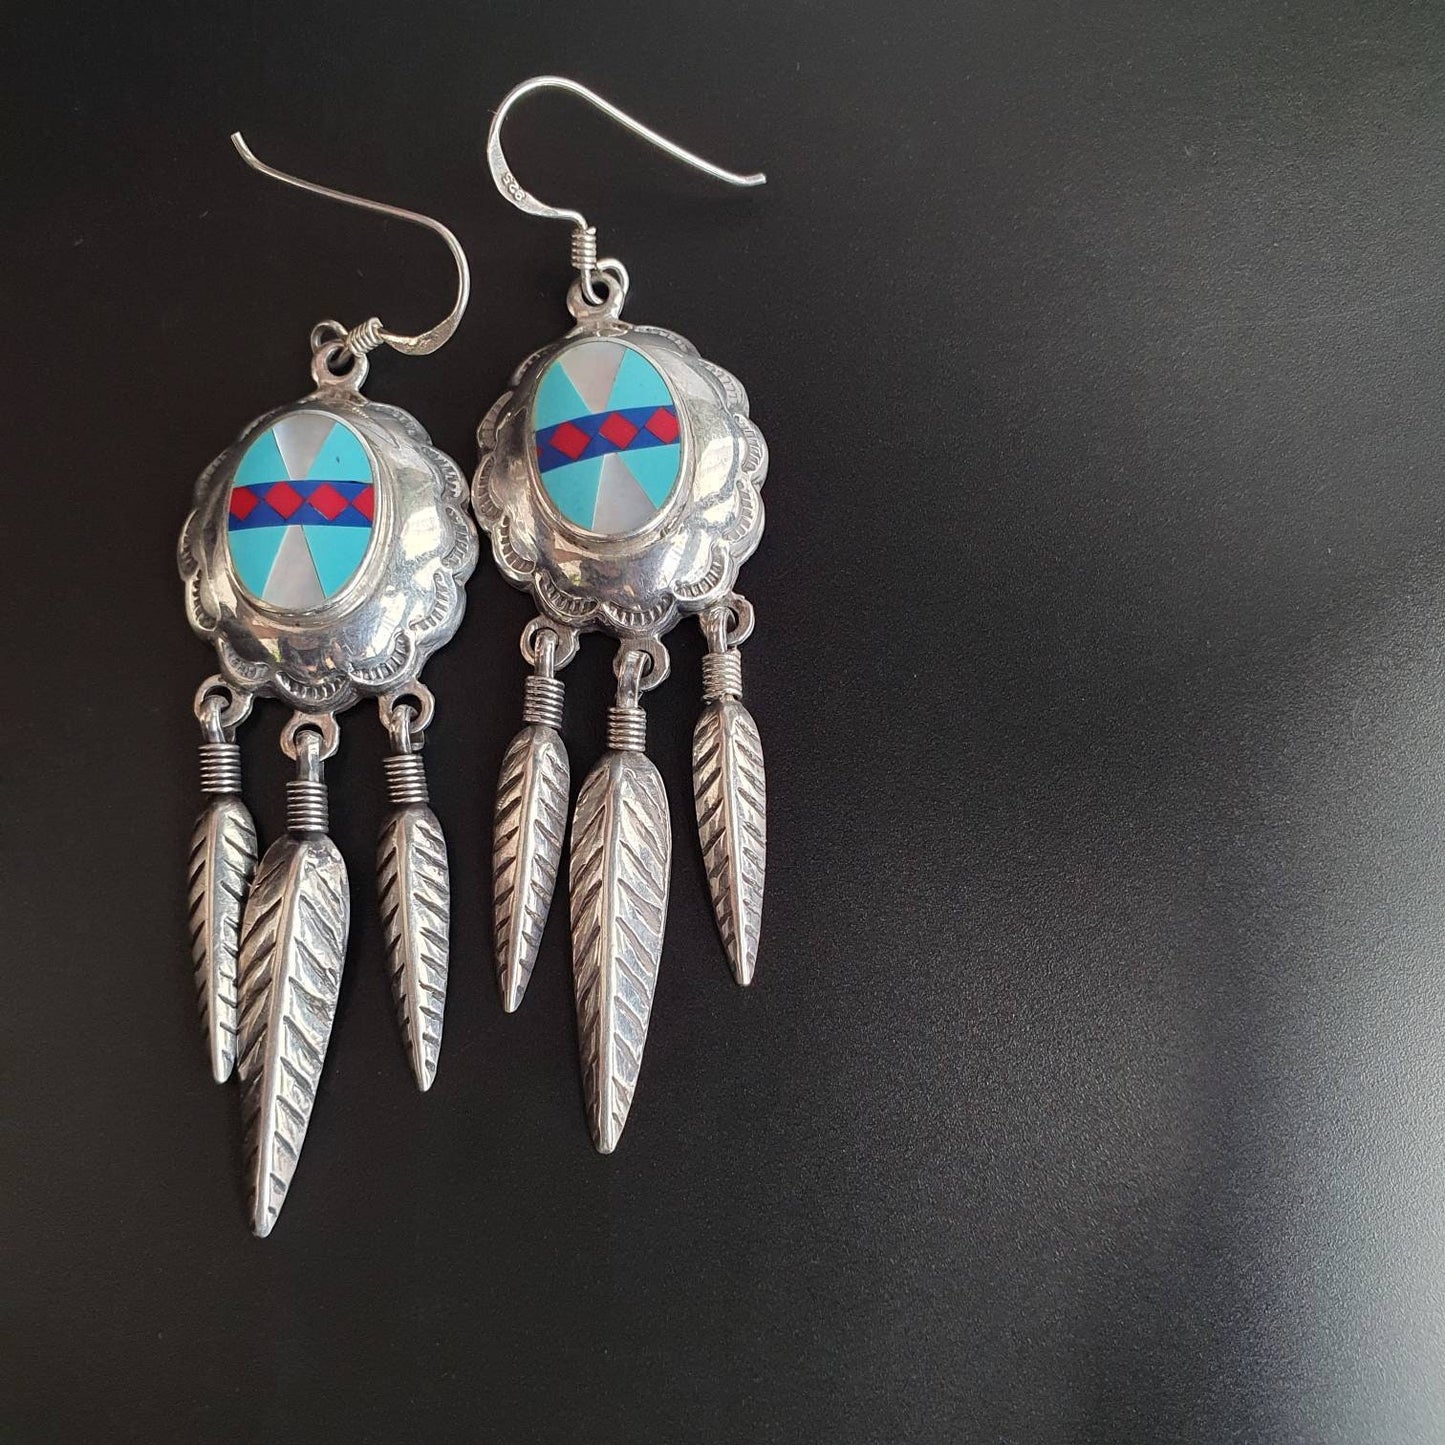 Najavo earrings, mosaic earrings, southwestern jewelry, silver collection, limited edition, bespoke earrings, sterling silver earrings,925